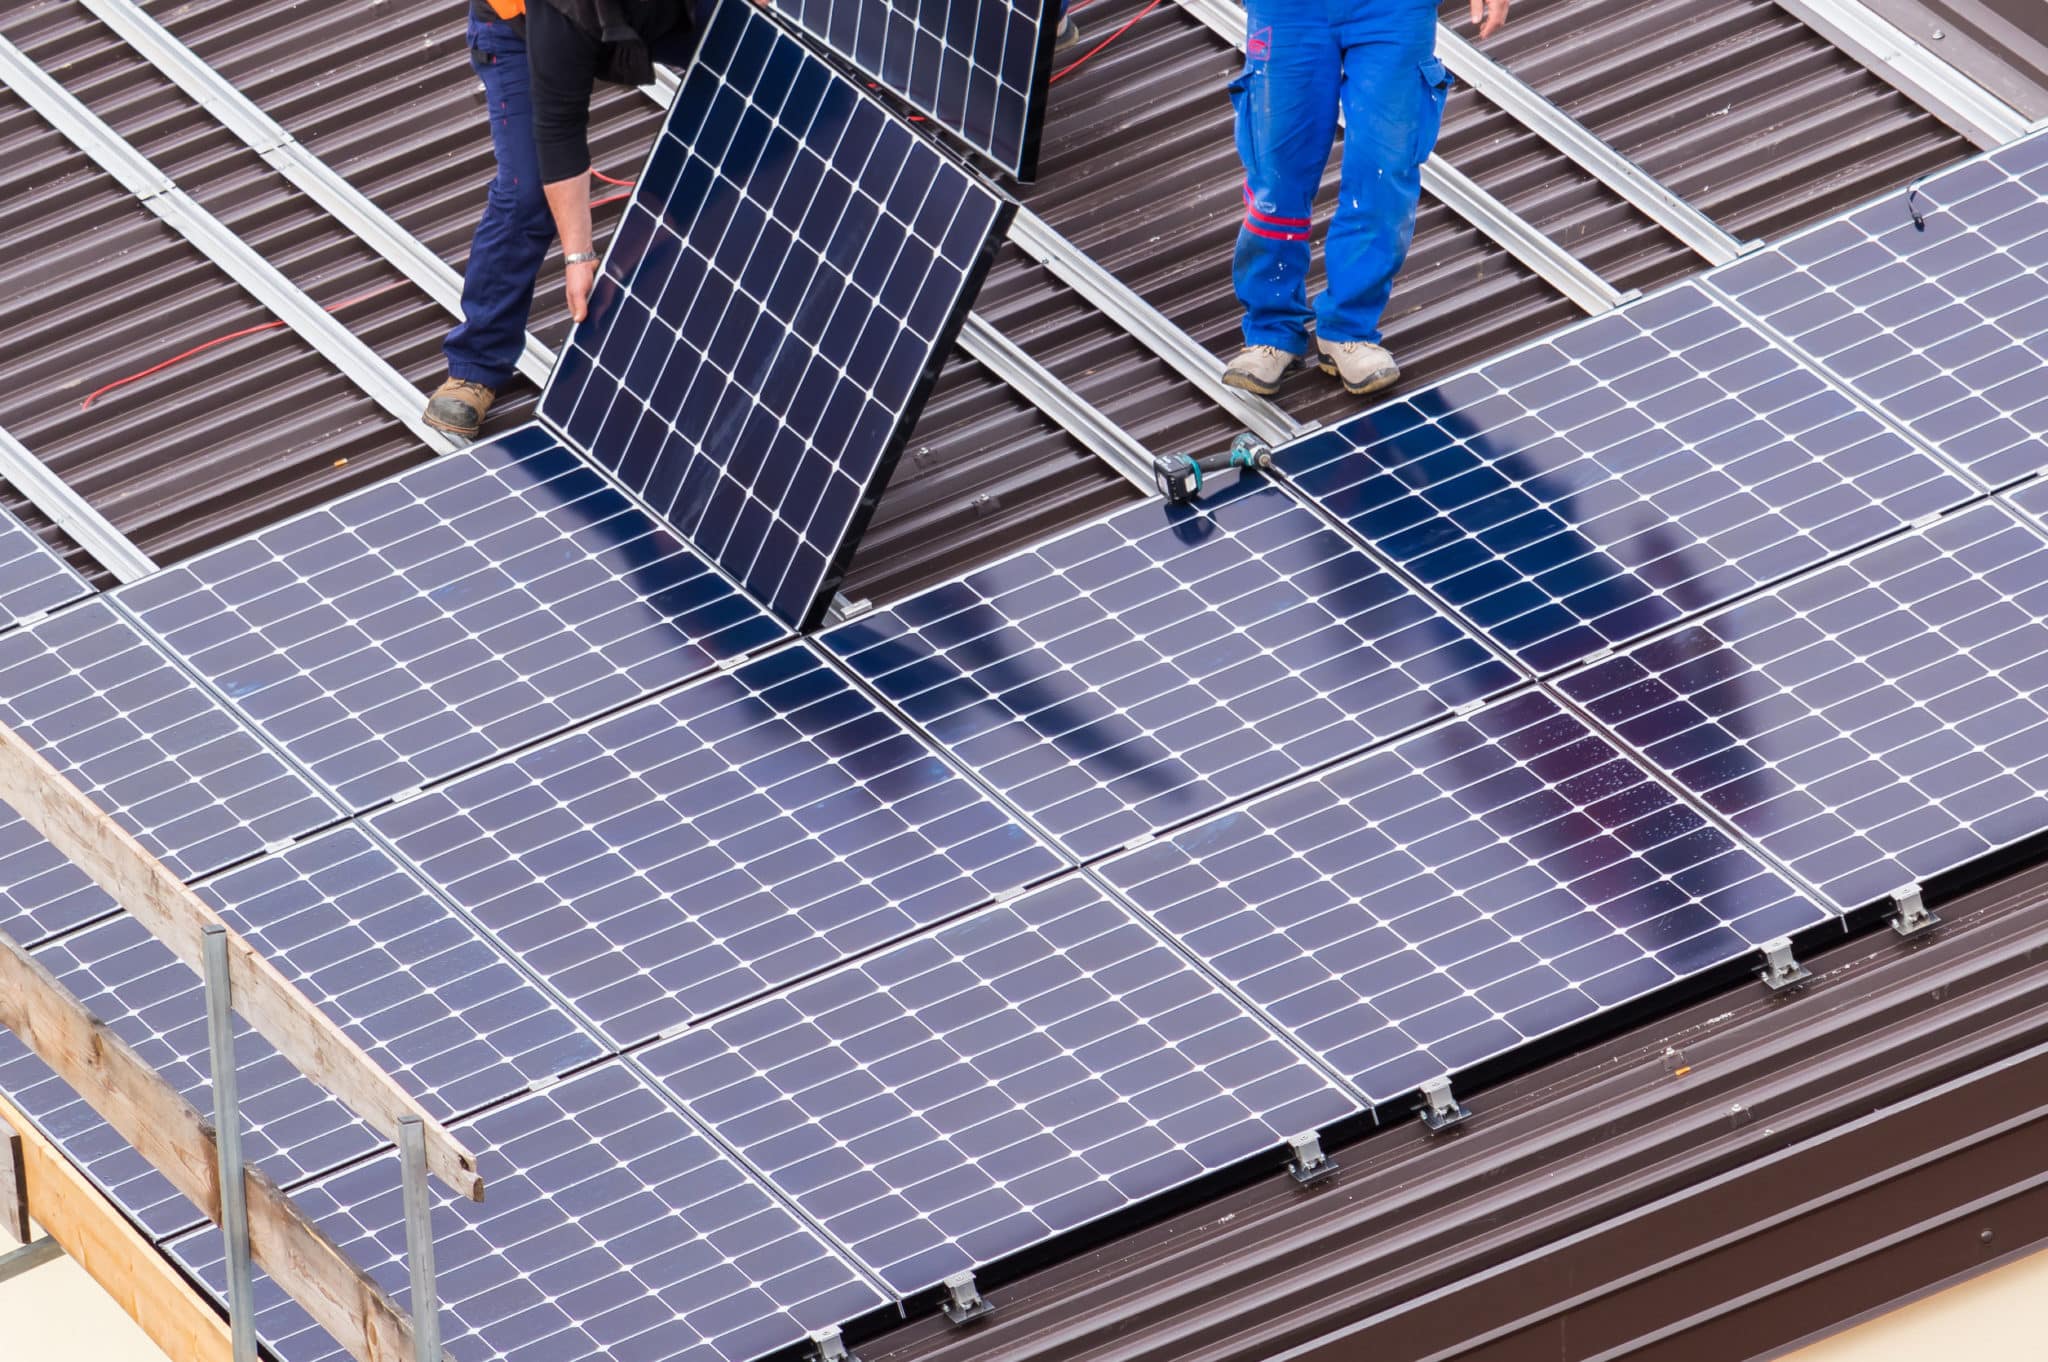 Installation of solar panels on a roof